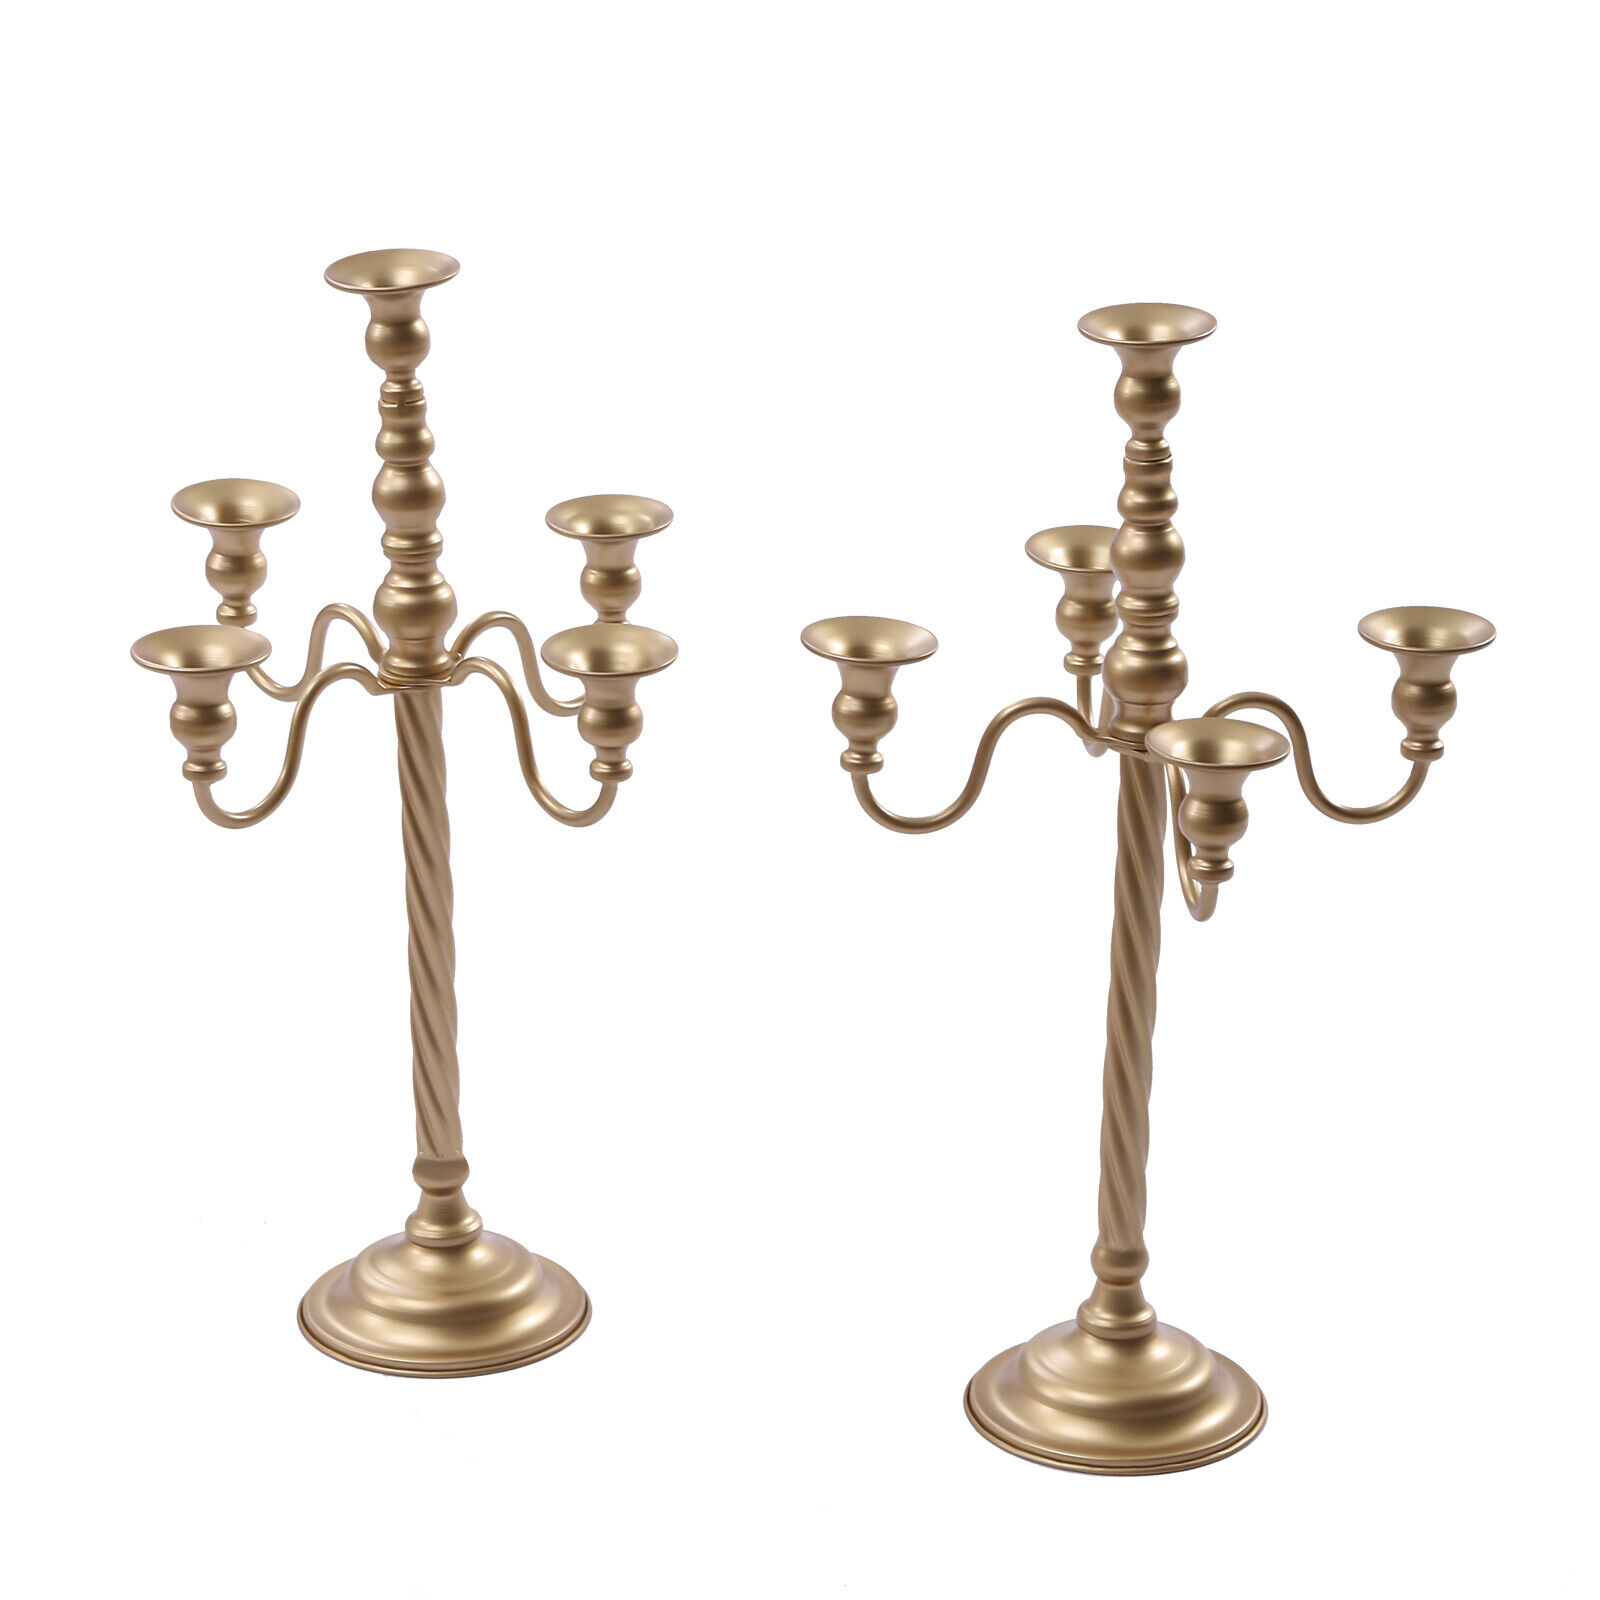 2 Pcs Gold Candelabra Candle Holder Centerpieces for Tables 5 Head Tall Candles 